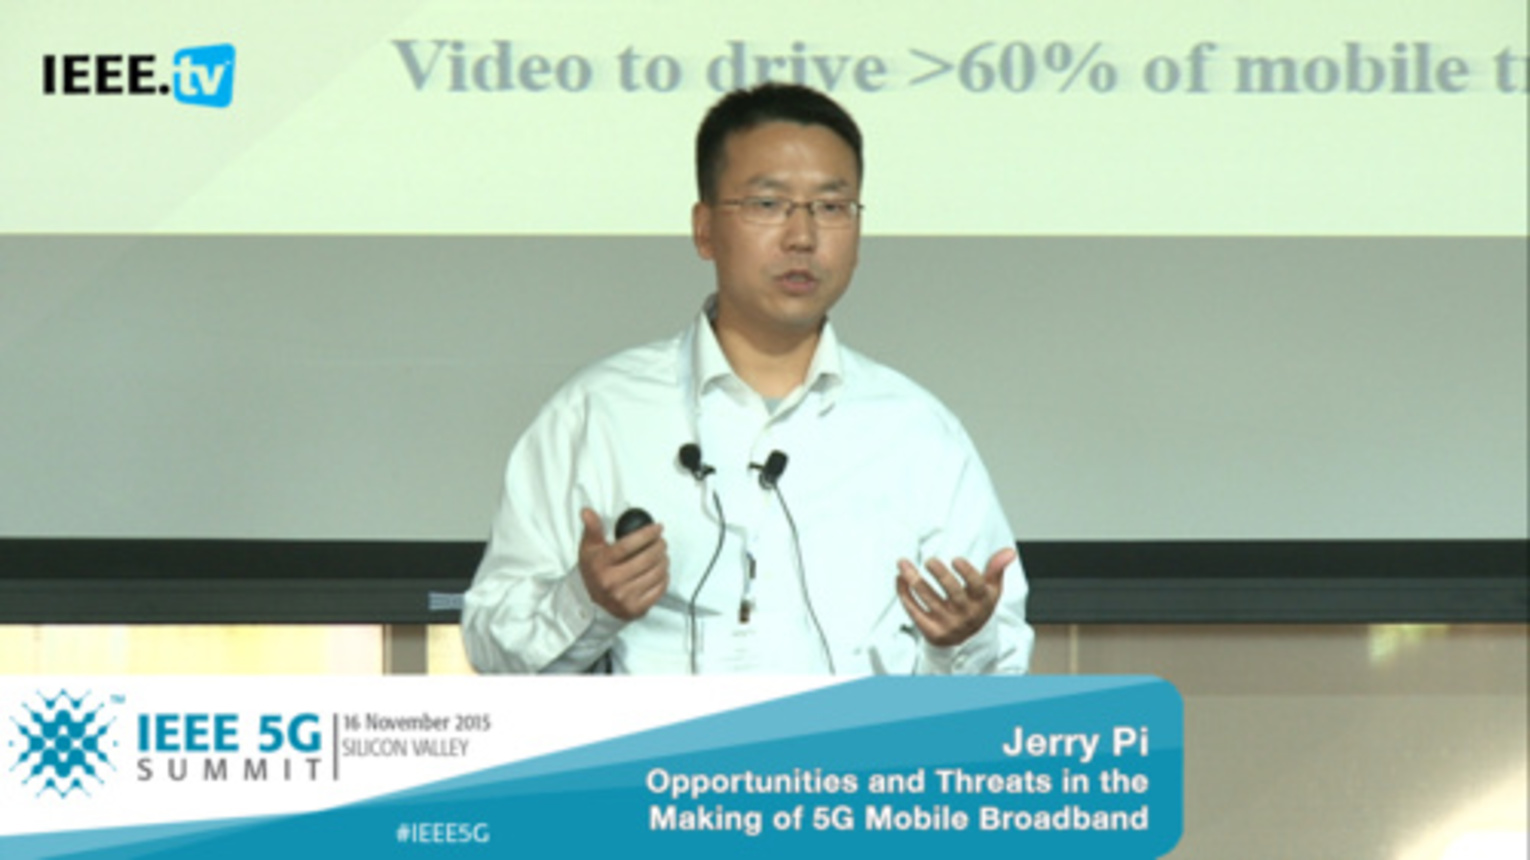 Silicon Valley 5G Summit 2015 - Jerry Pi - Riding the Mobile Traffic Tsunami: Opportunities and Threats in the Making of 5G Mobile Broadband